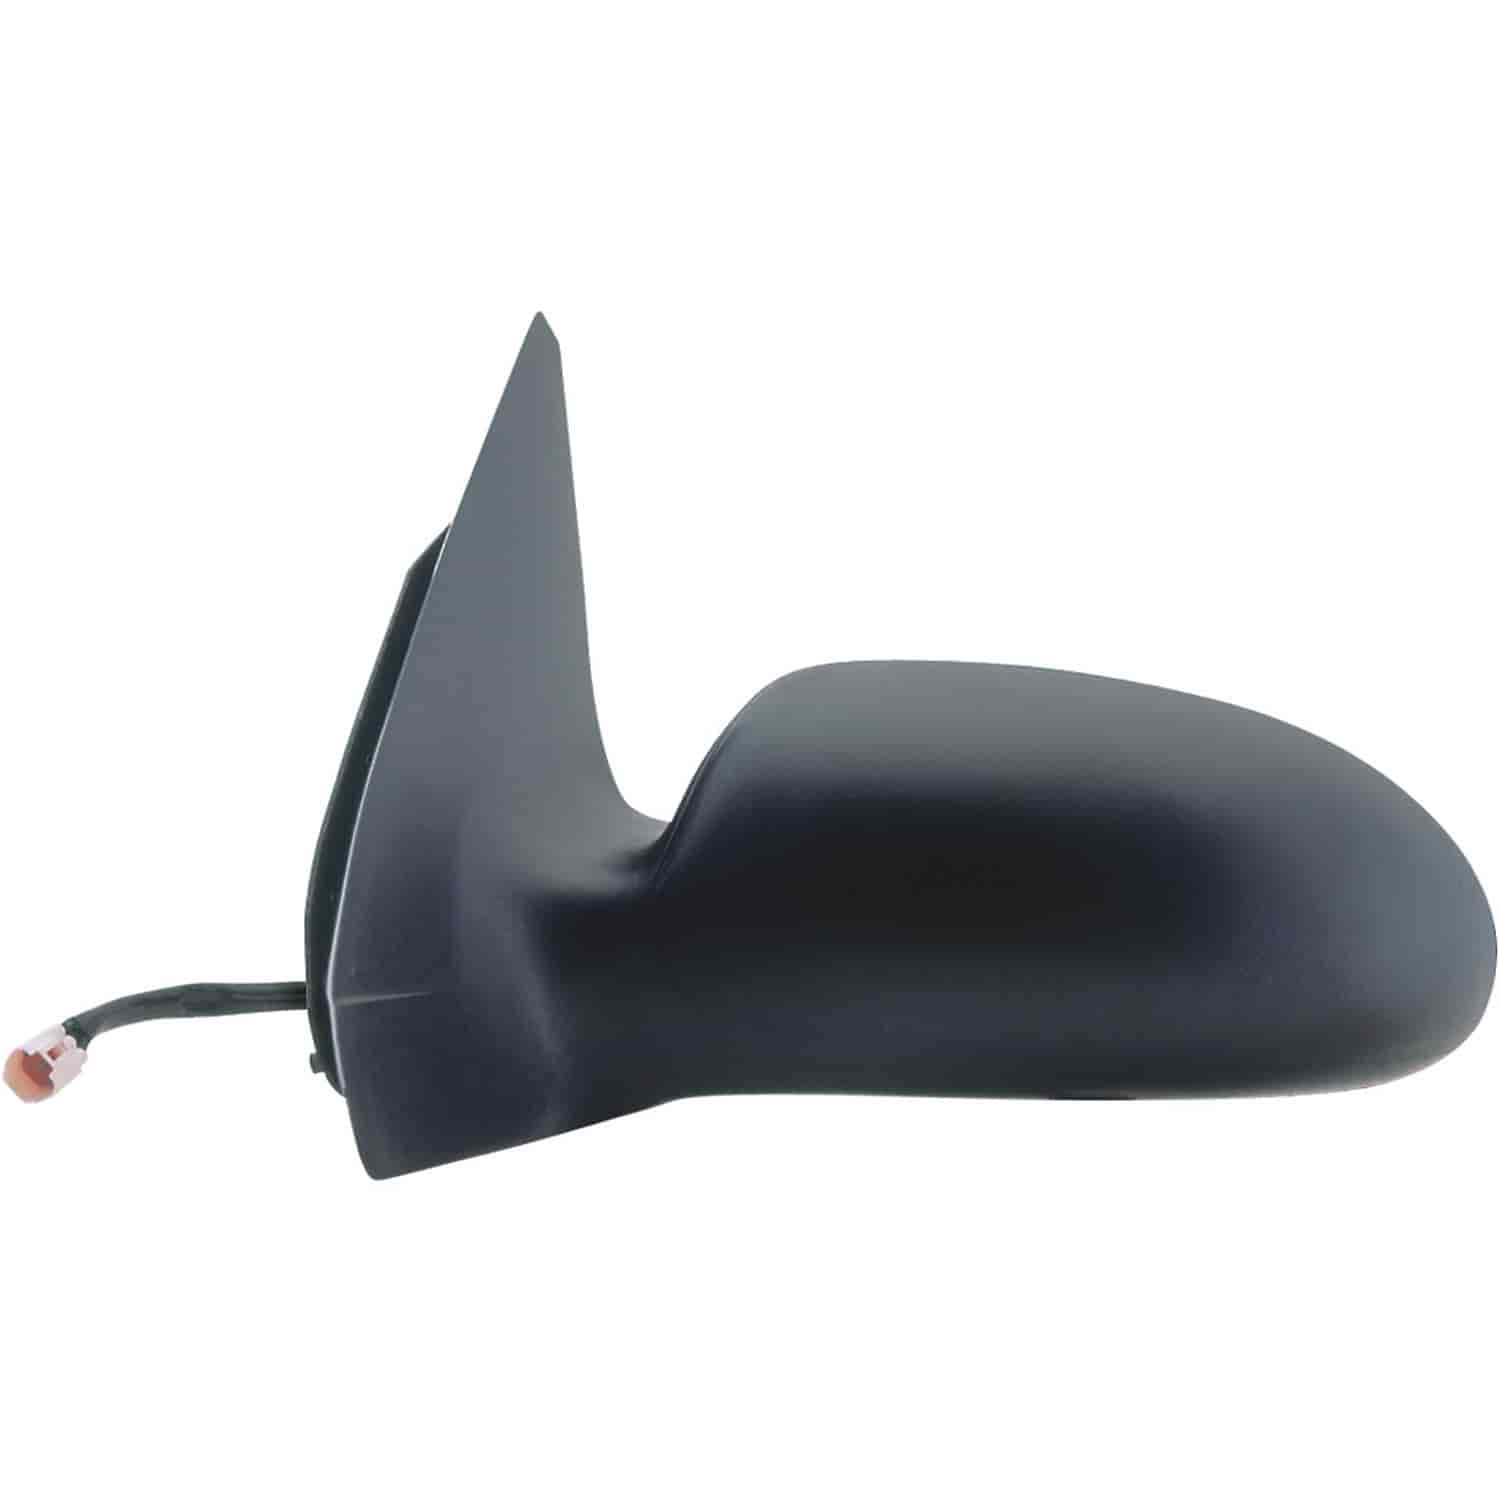 OEM Style Replacement mirror for 00-07 Ford Focus w/o SVT model driver side mirror tested to fit and